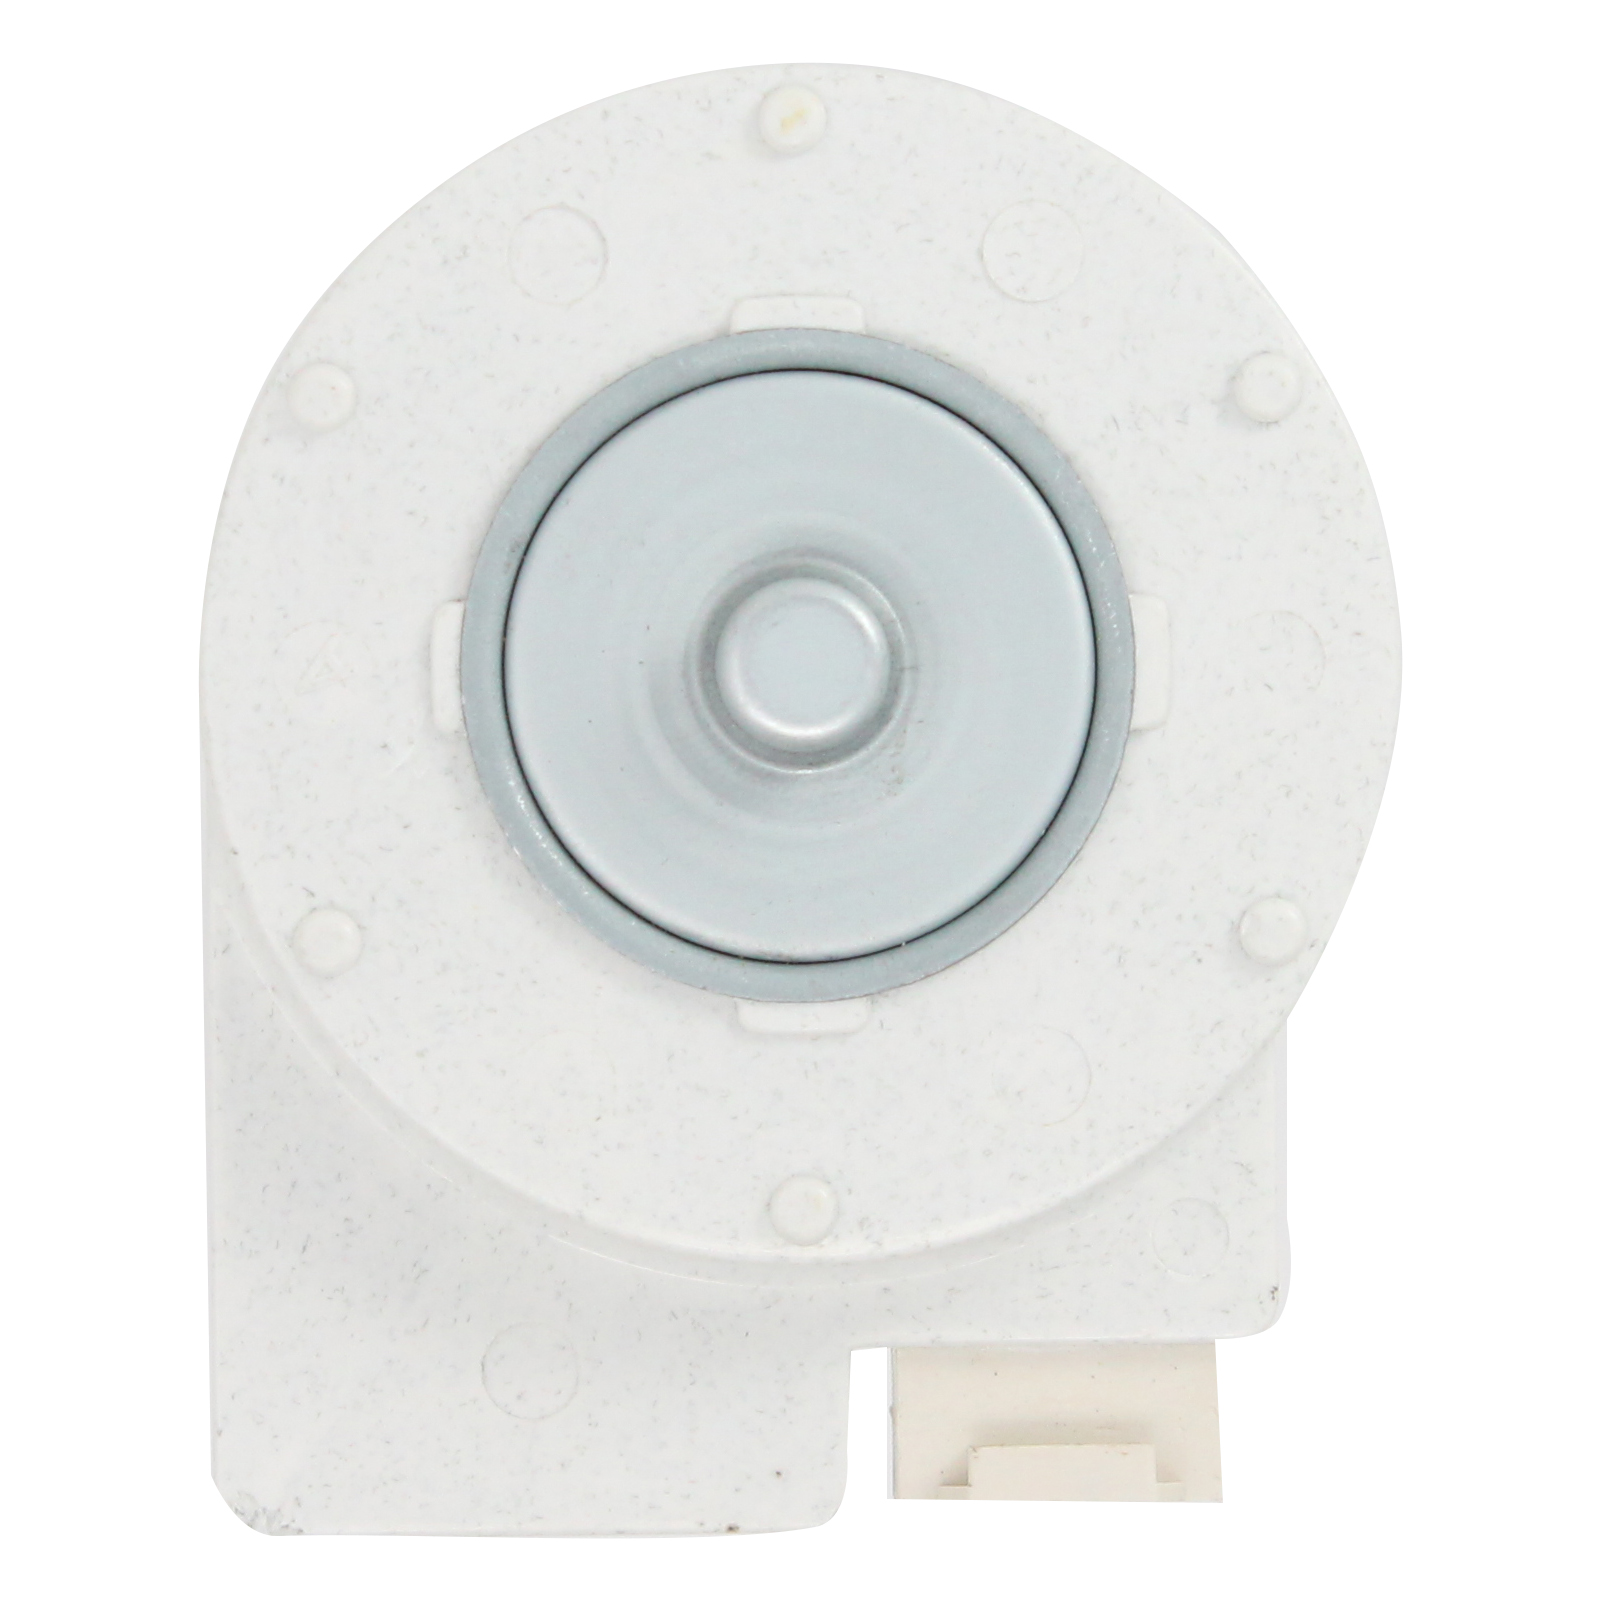 DA31-00146E Evaporator Fan Motor Replacement for Samsung RFG238AAWP/XAA (0000) Refrigerator - Compatible with DA31-00146E Fan Motor - UpStart Components Brand - image 2 of 4